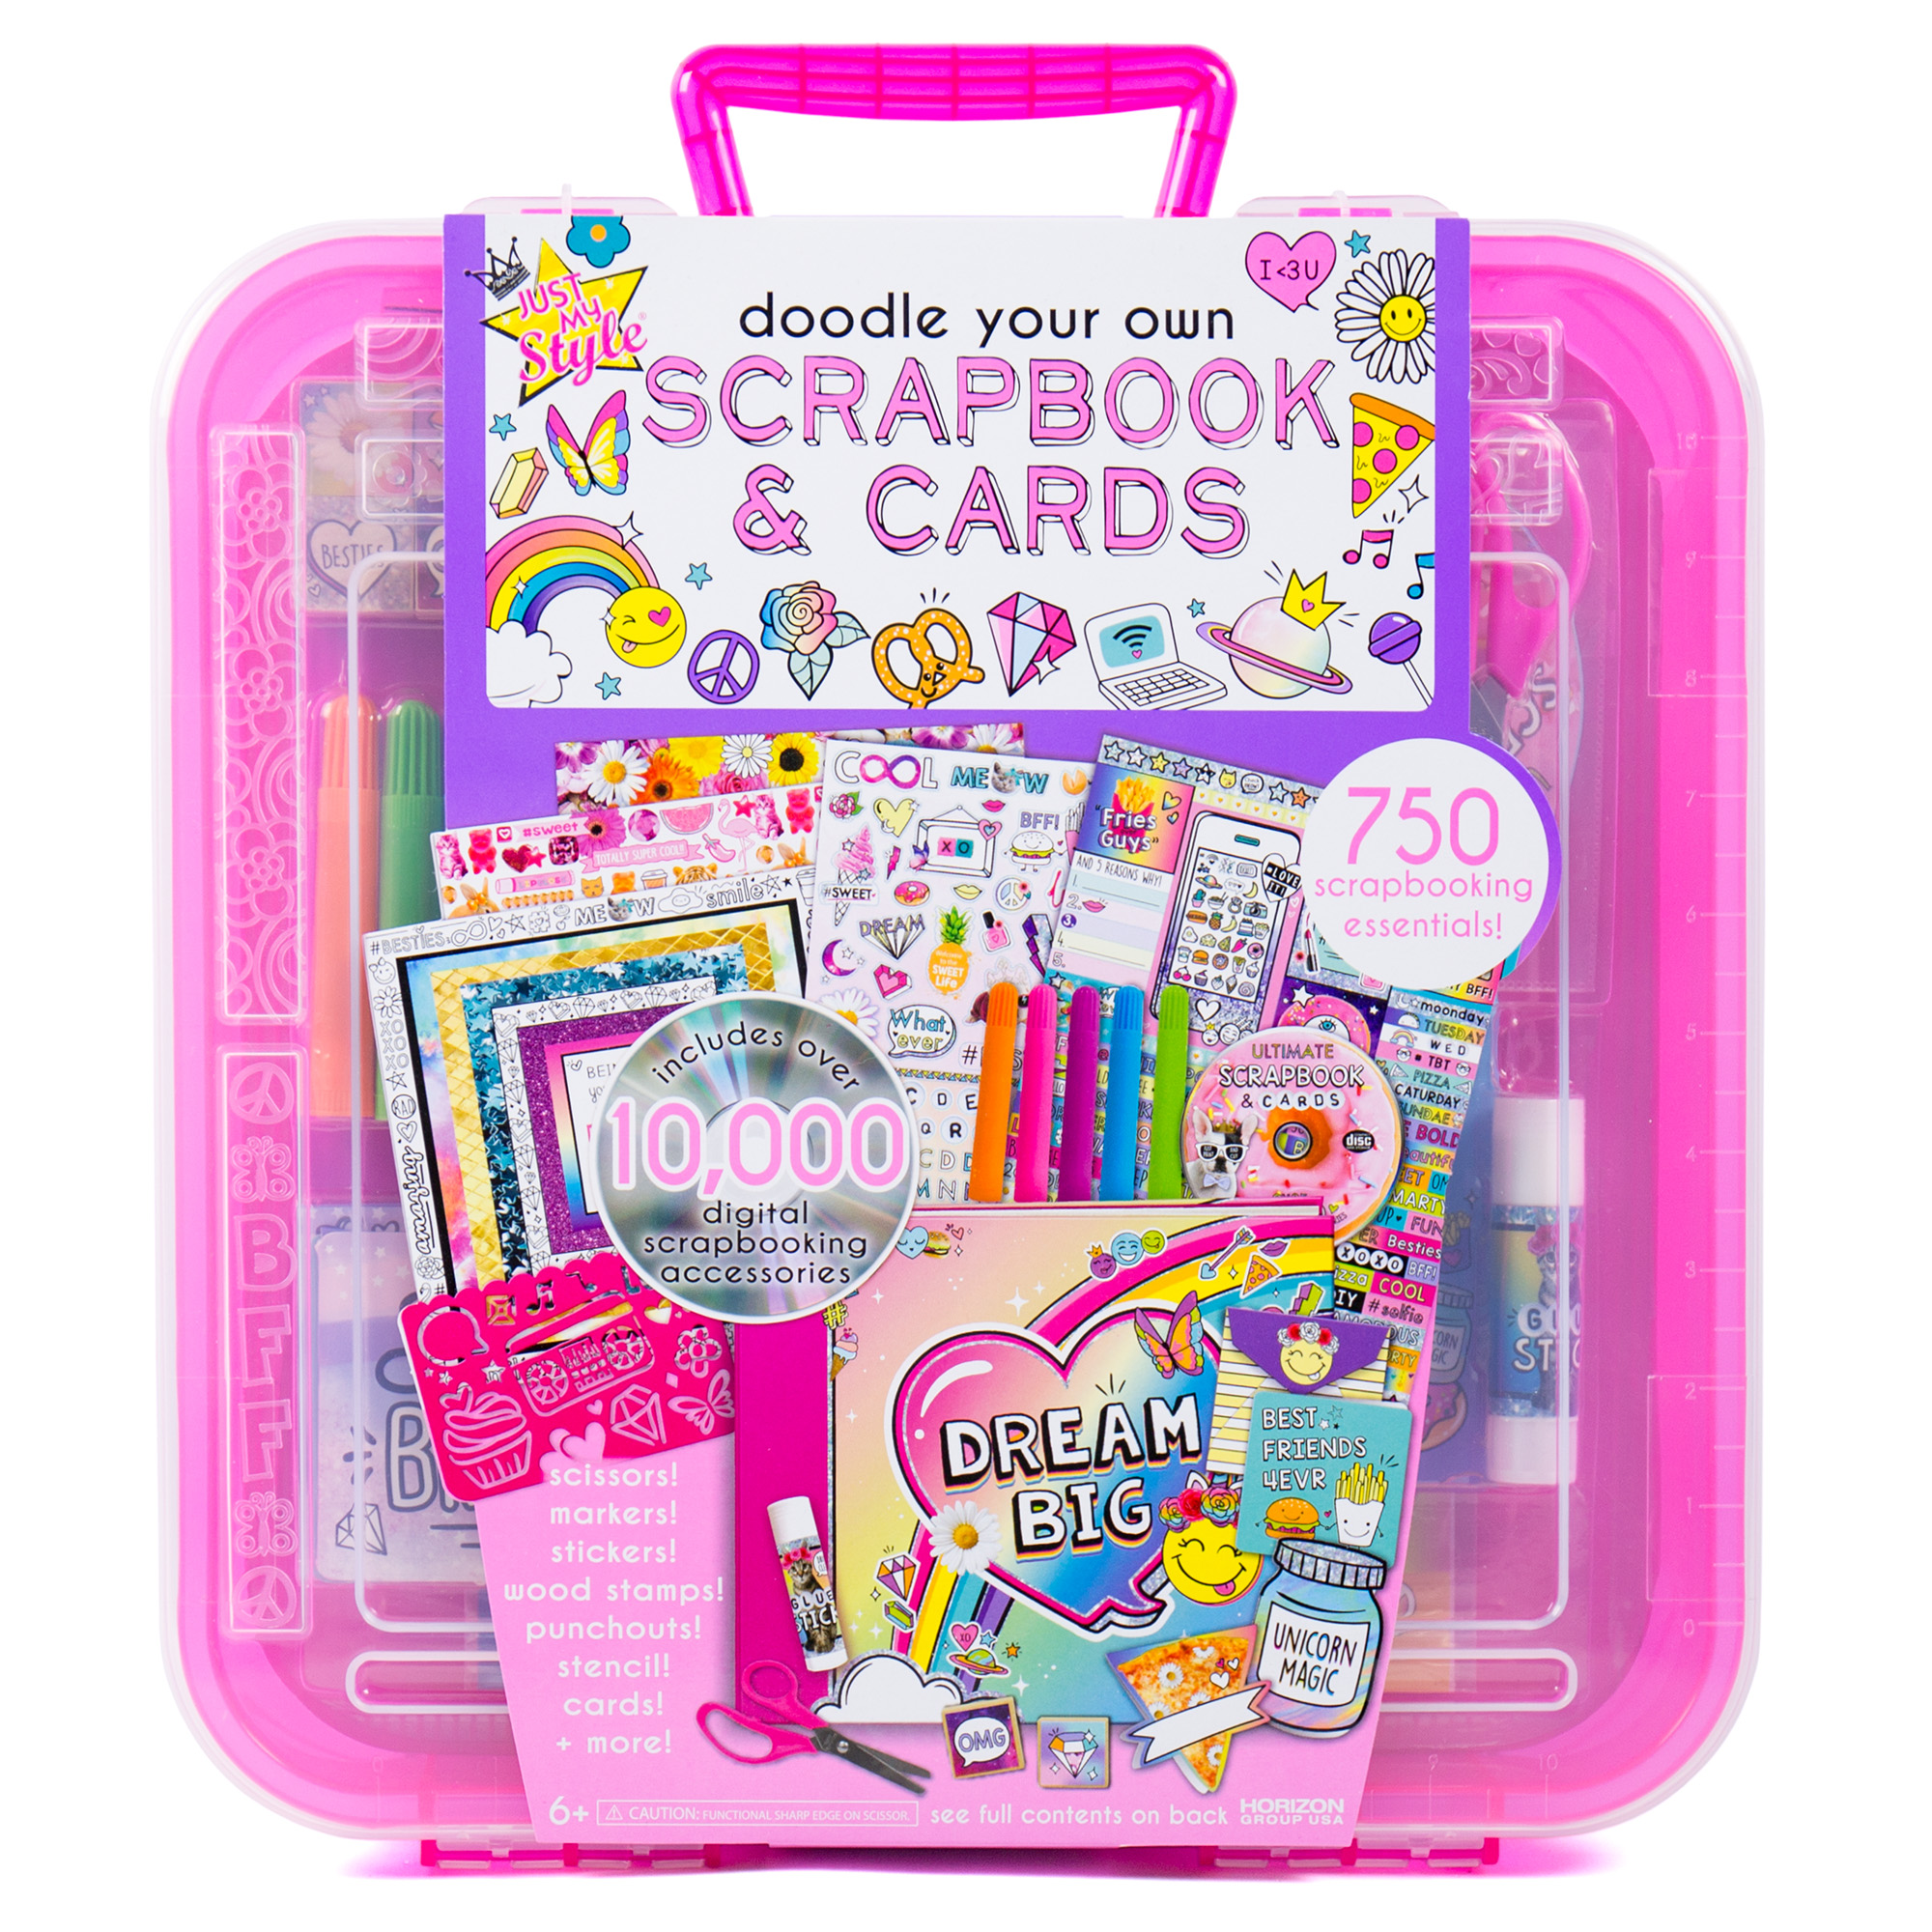 Just My Style Doodle Your Own Scrapbook & Cards, Arts & Crafts Kit, 6+ - image 1 of 6